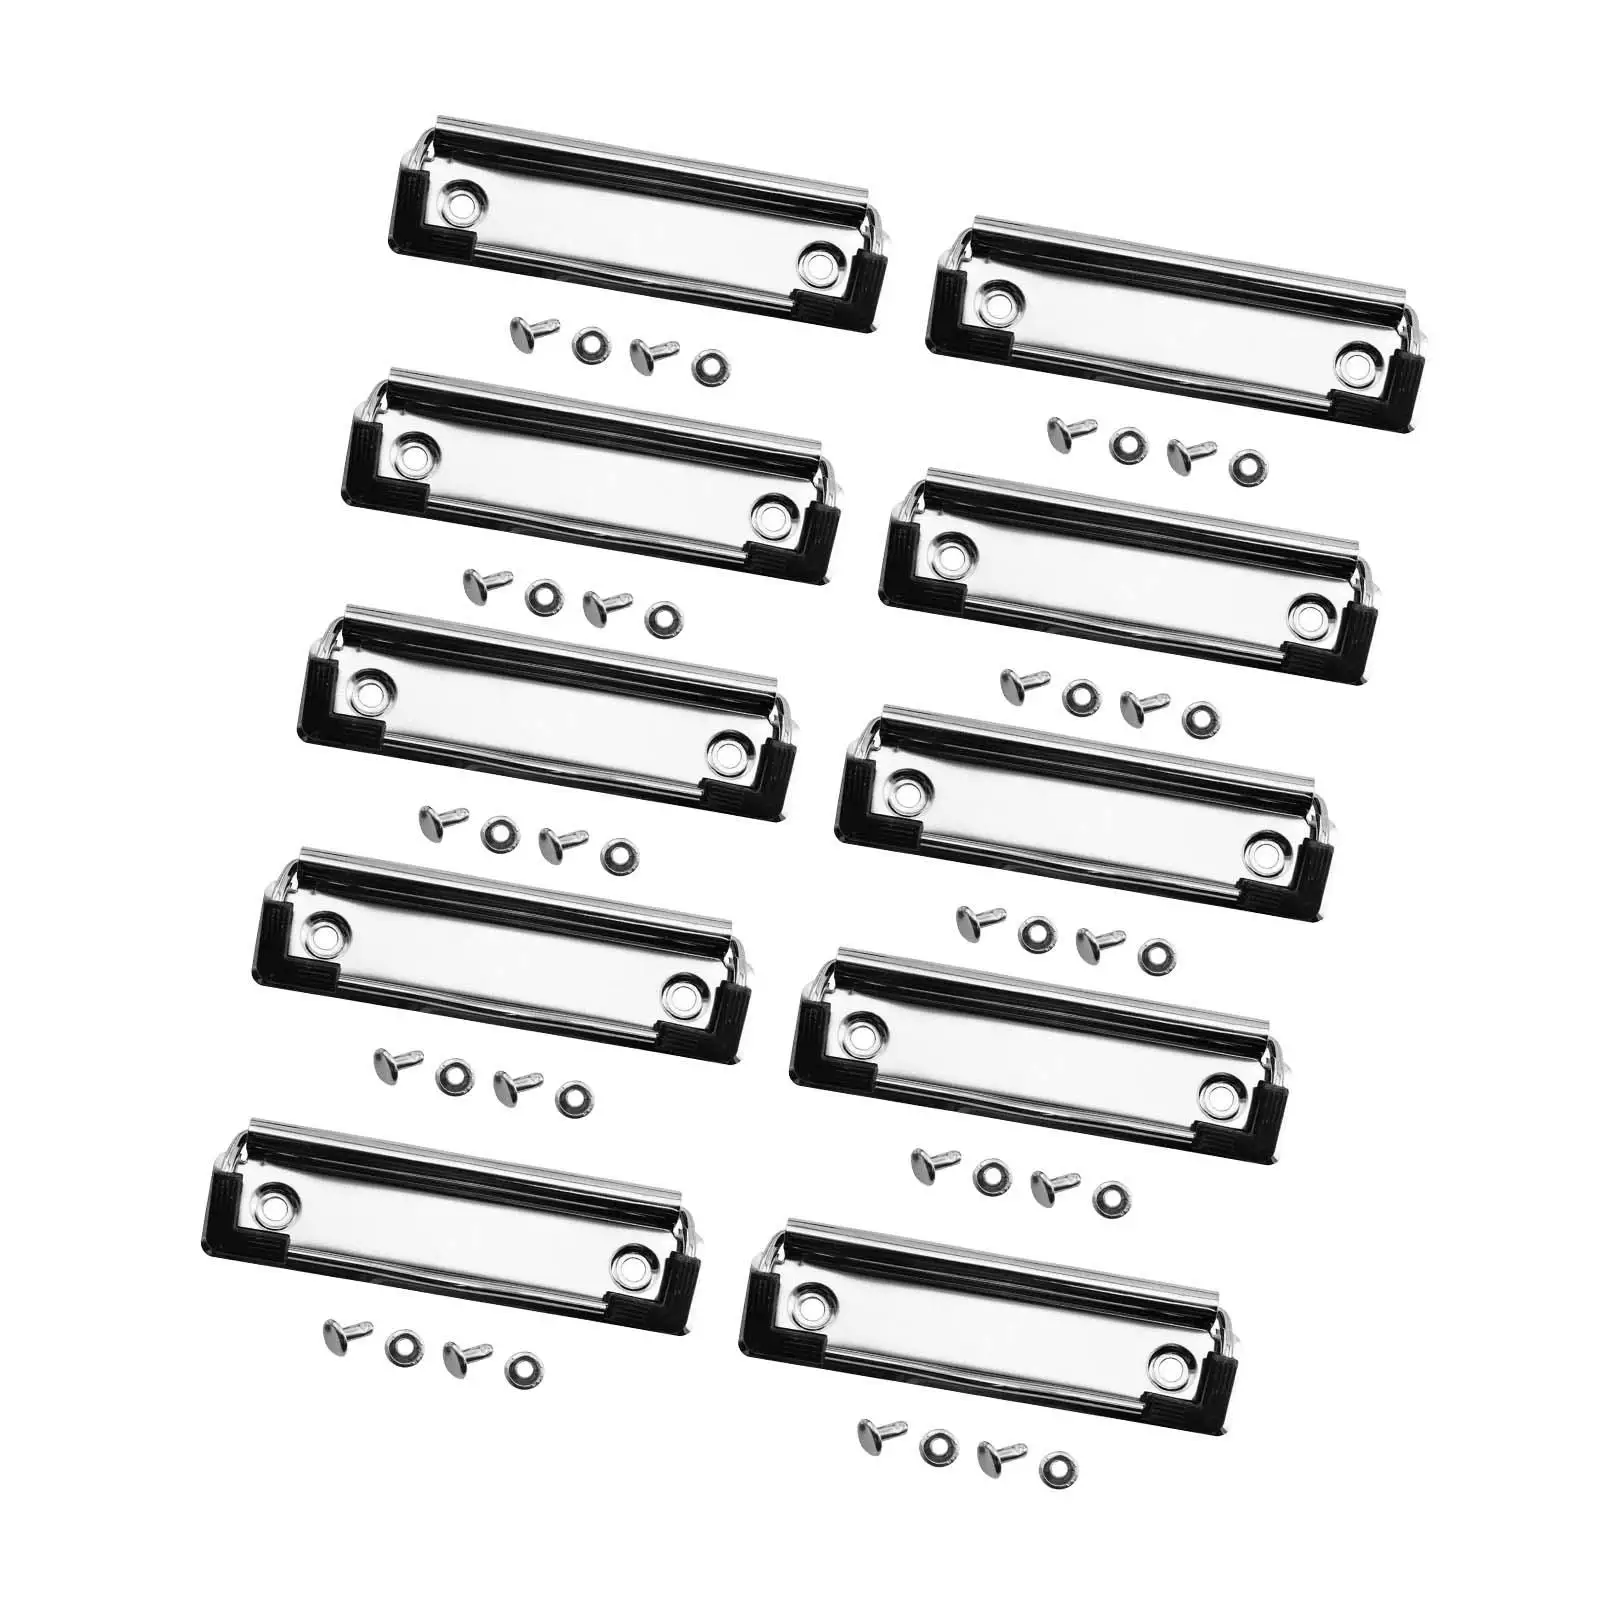 10x Mountable Clipboard Clips with Rubber Grip 10cm Spring Loaded Metal Stationery Plate Holder for Class School Business Office